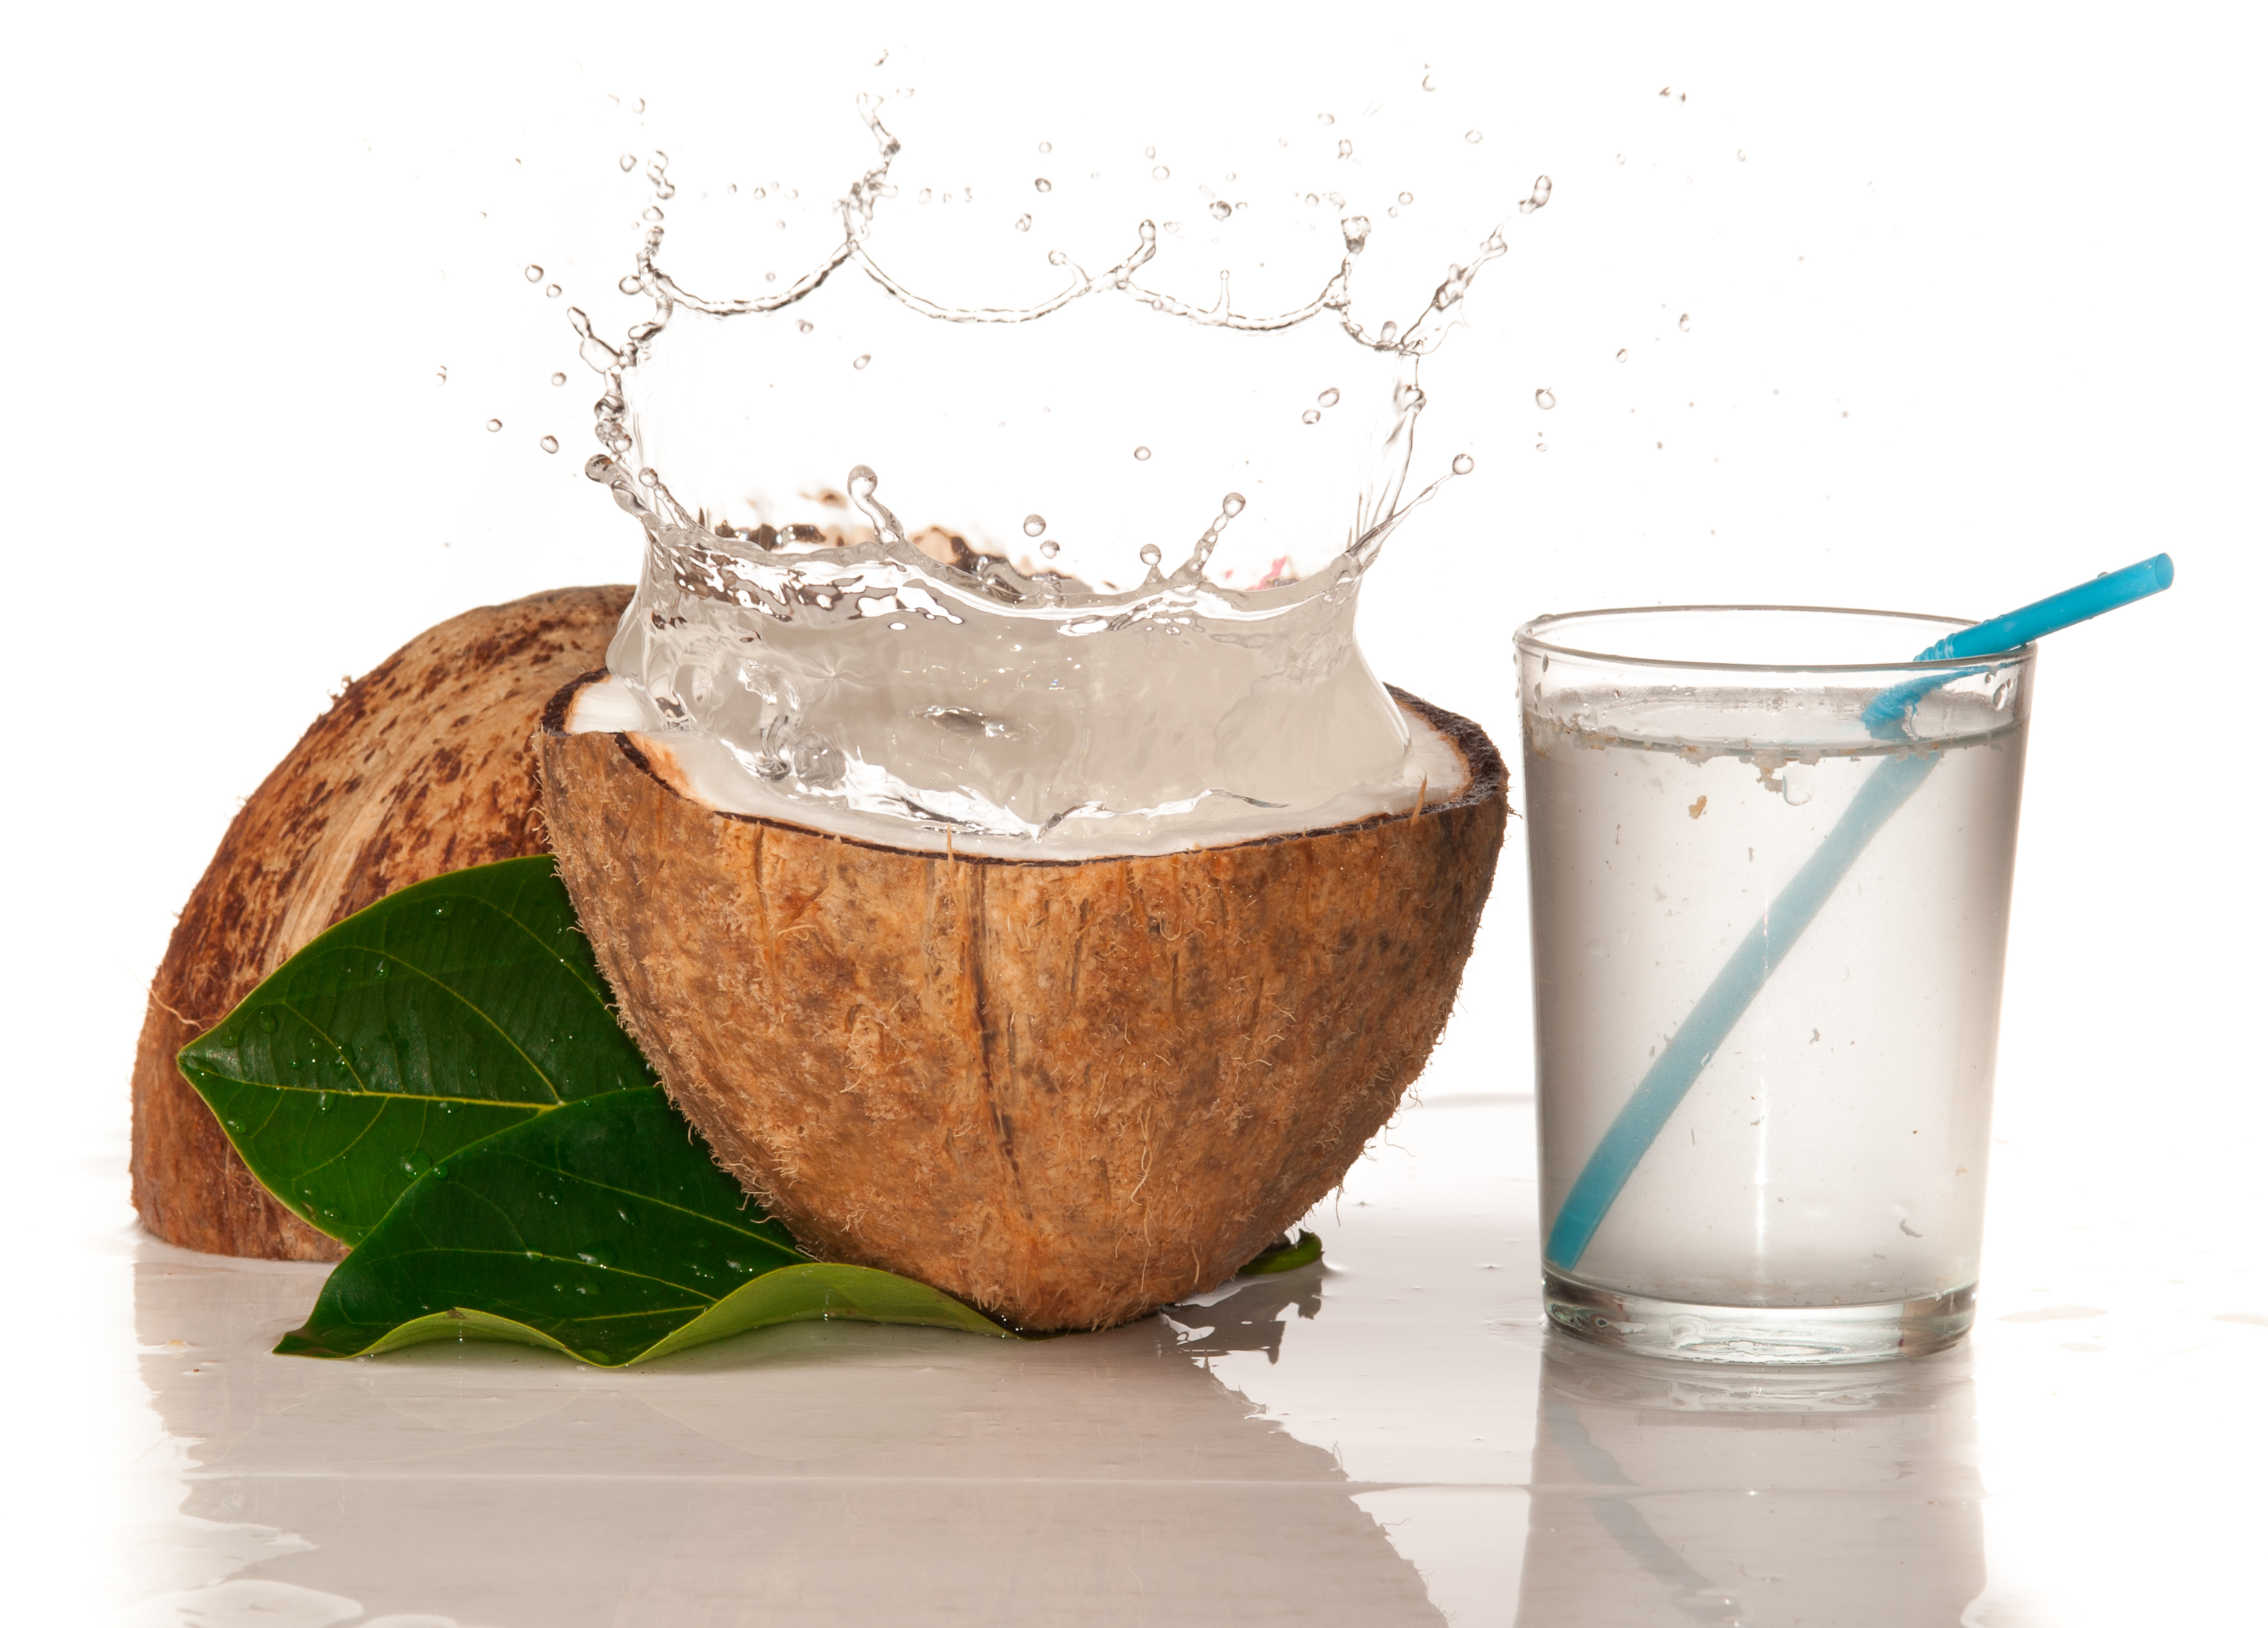 5 ways coconut water can improve your life